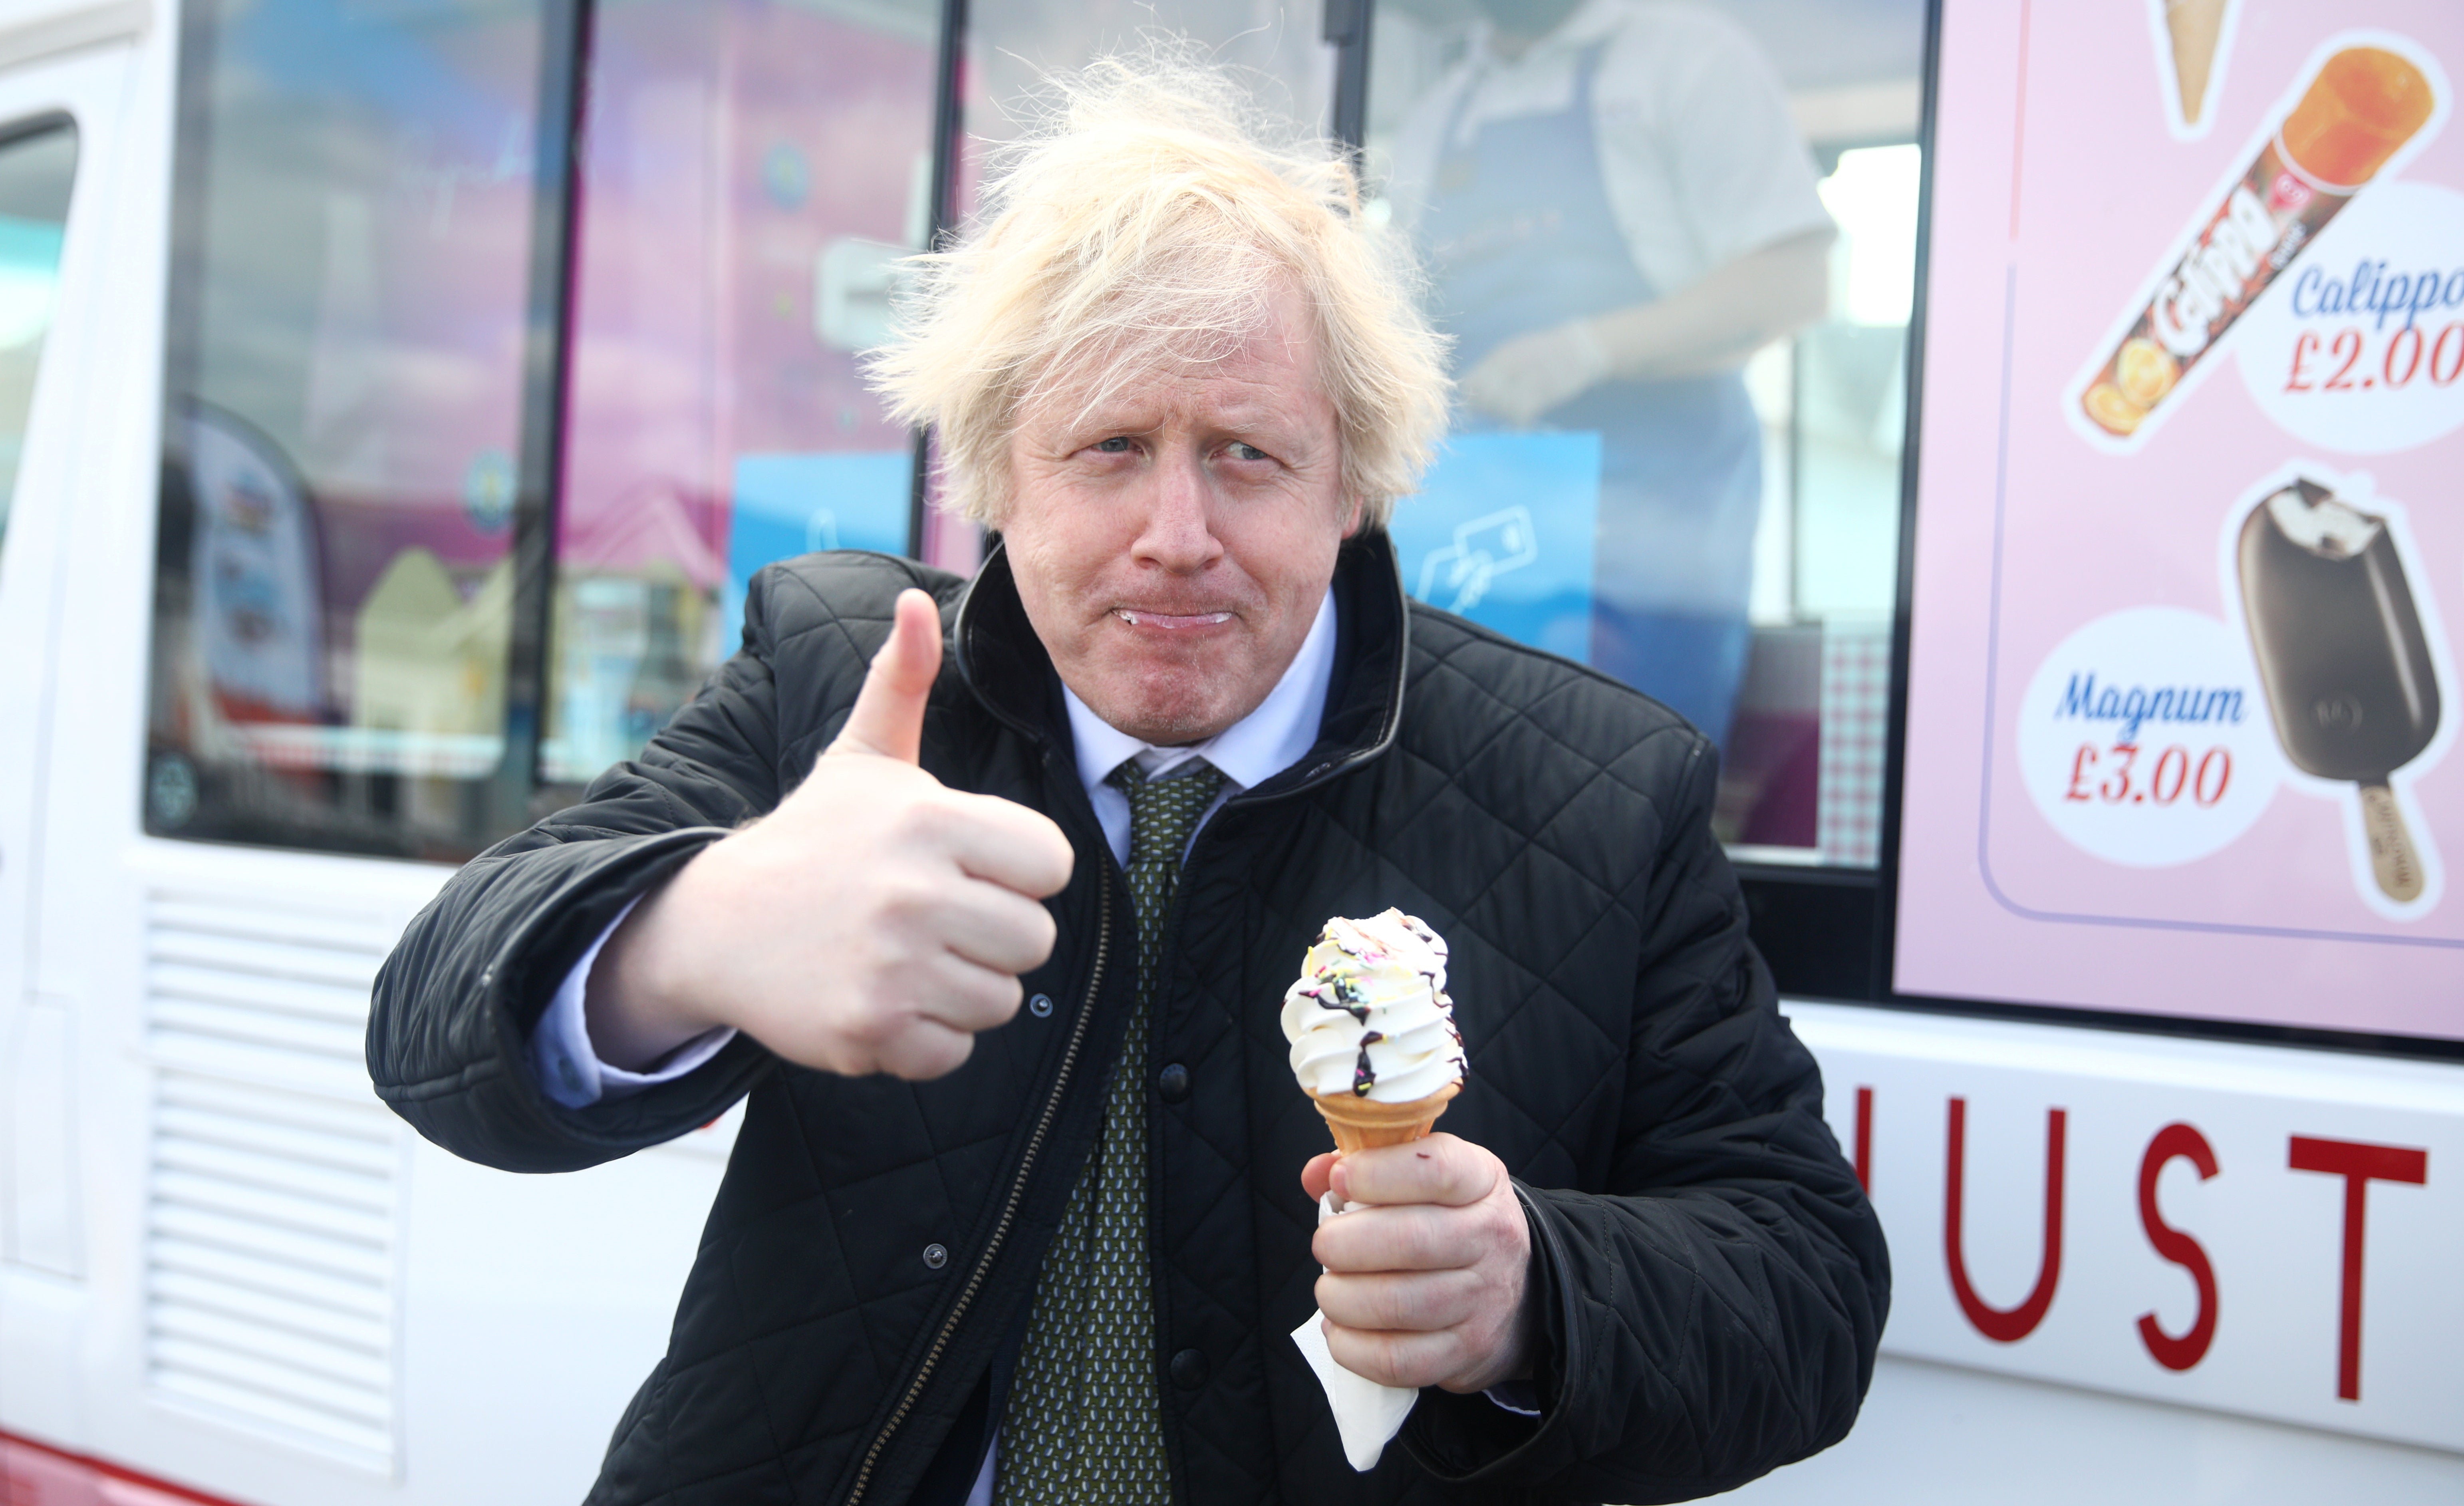 Boris Johnson, pictured here at a holiday park in Cornwall, enjoyed a trip to Mustique at cost reportedly questioned by parliamentary authorities